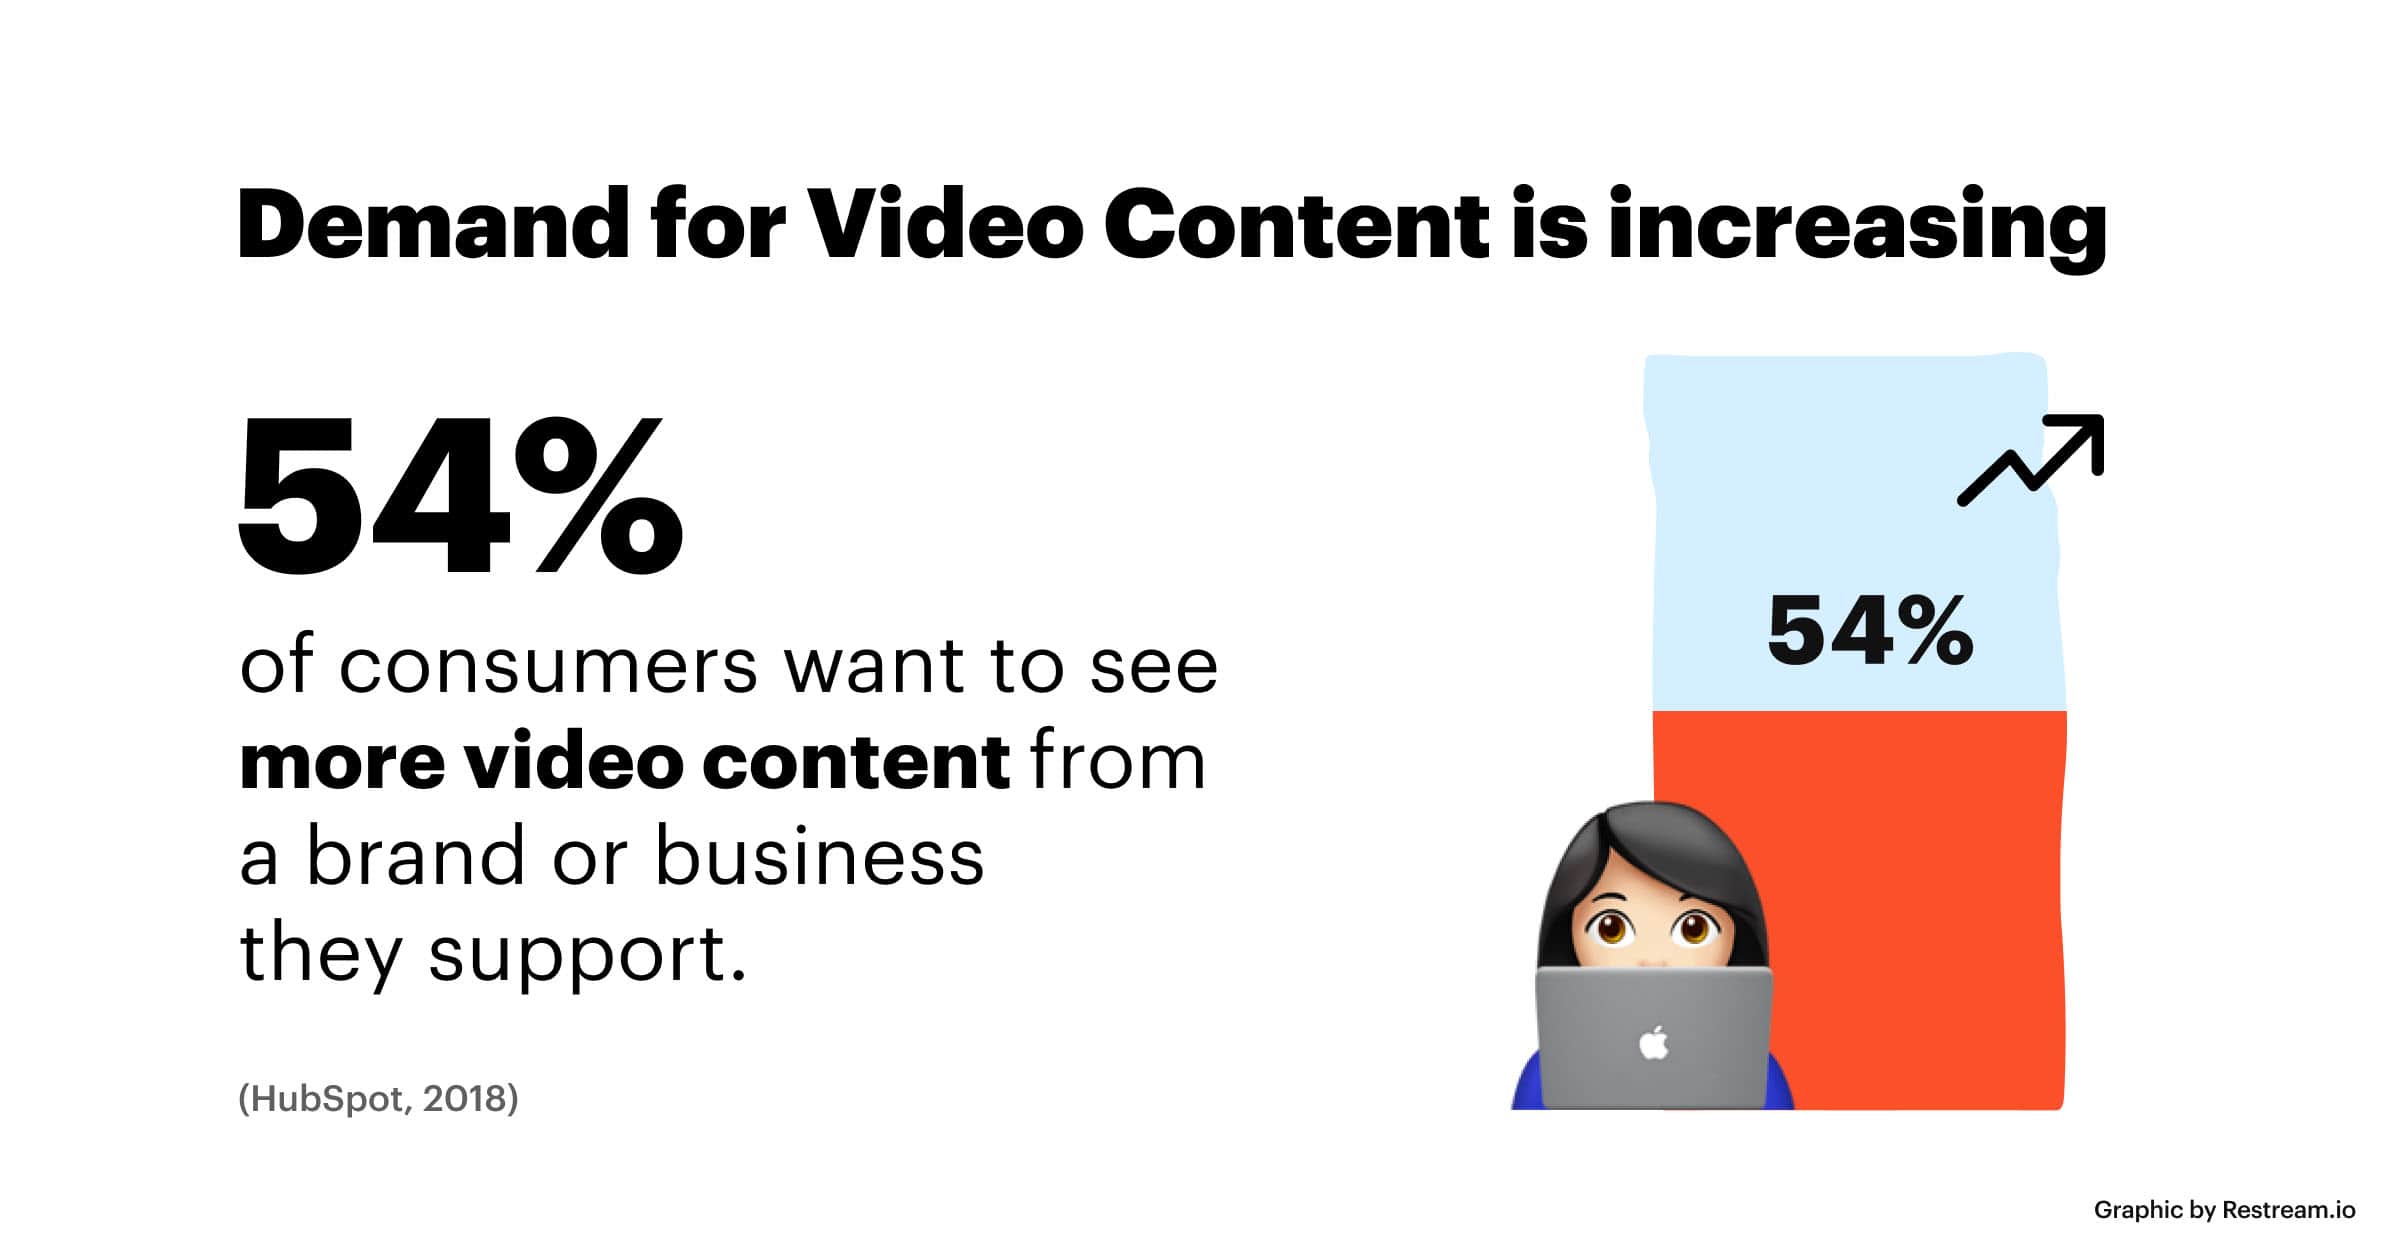 Demand for video content is increasing